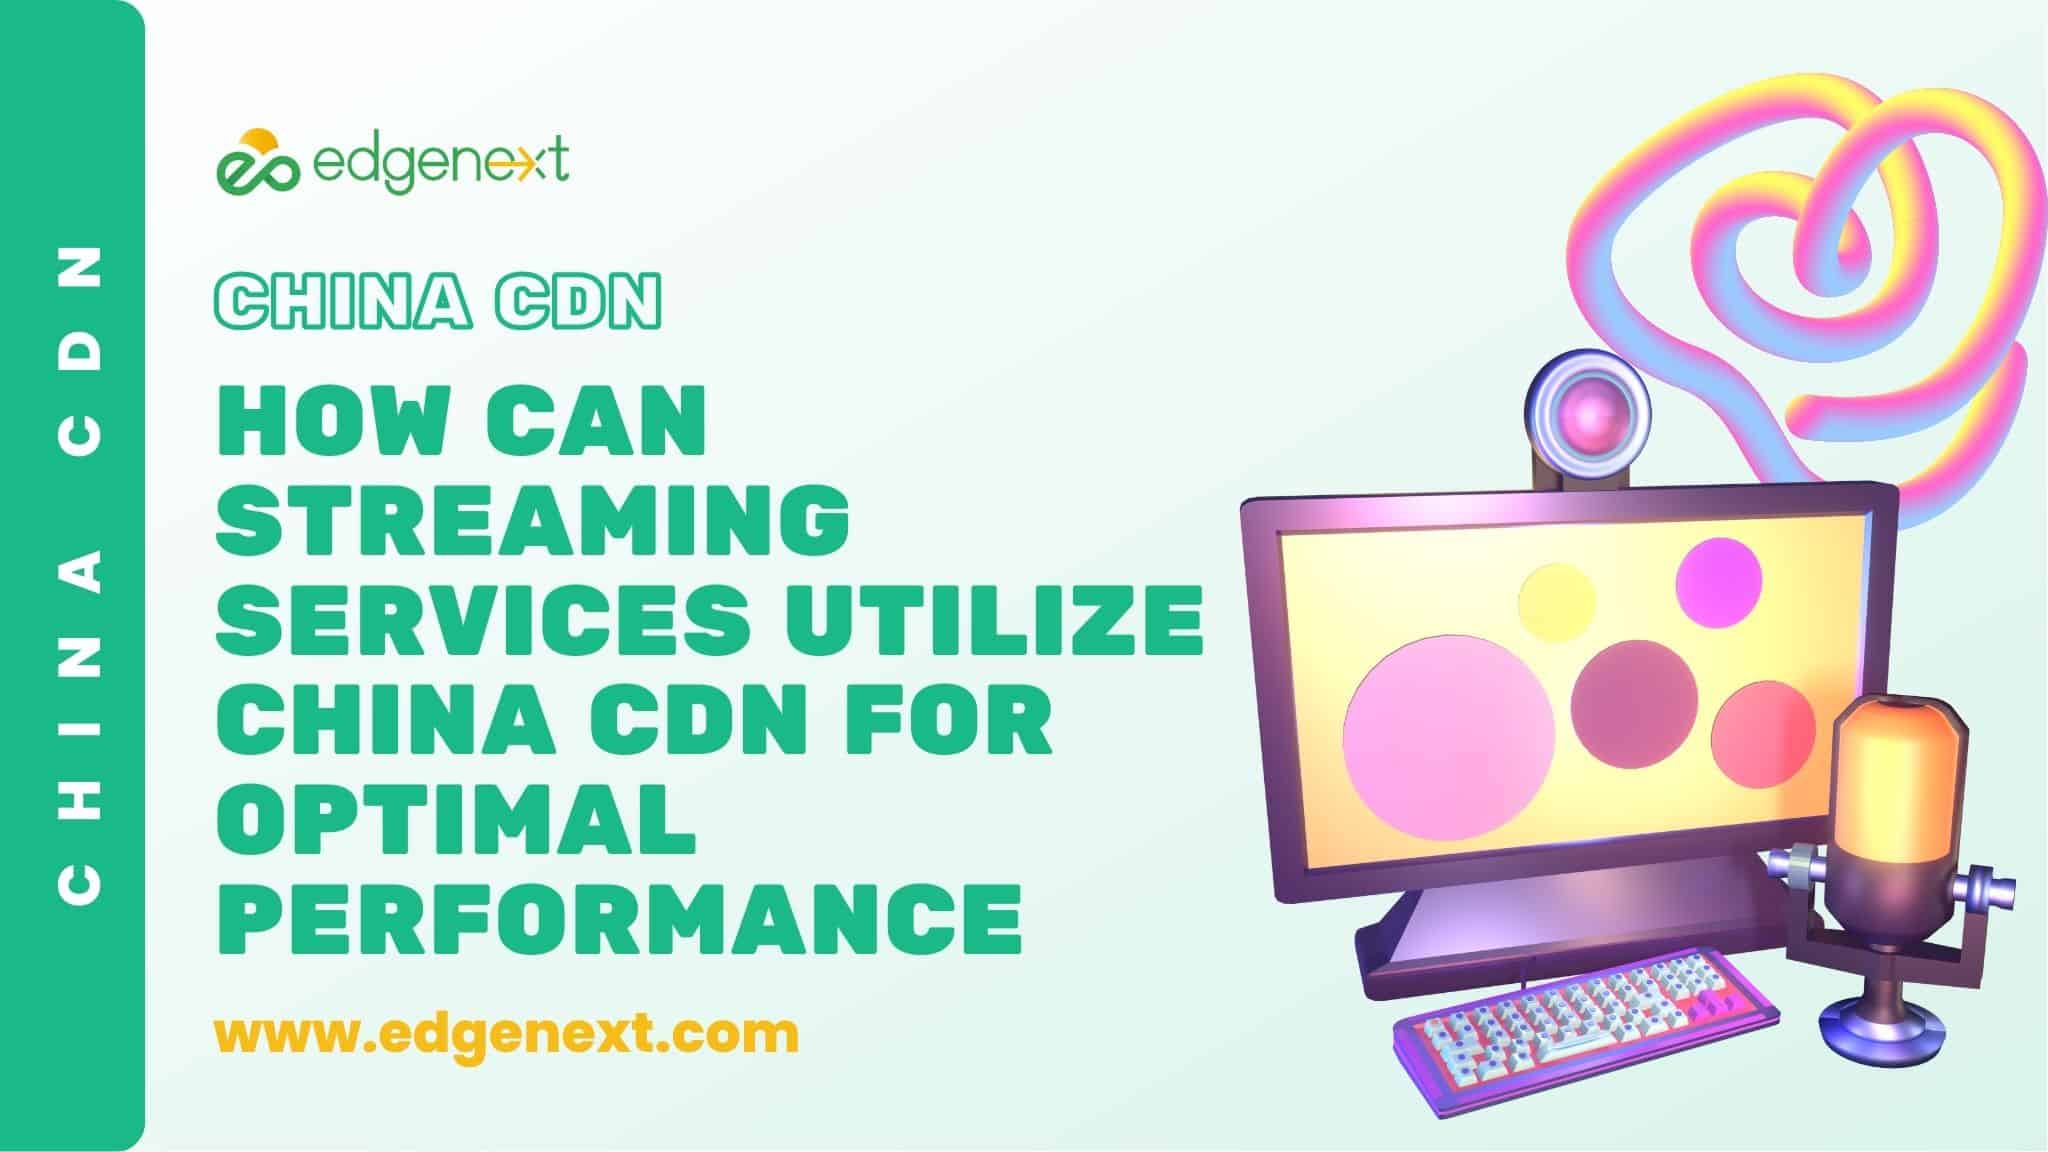 How Can Streaming Services Utilize China CDN for Optimal Performance?